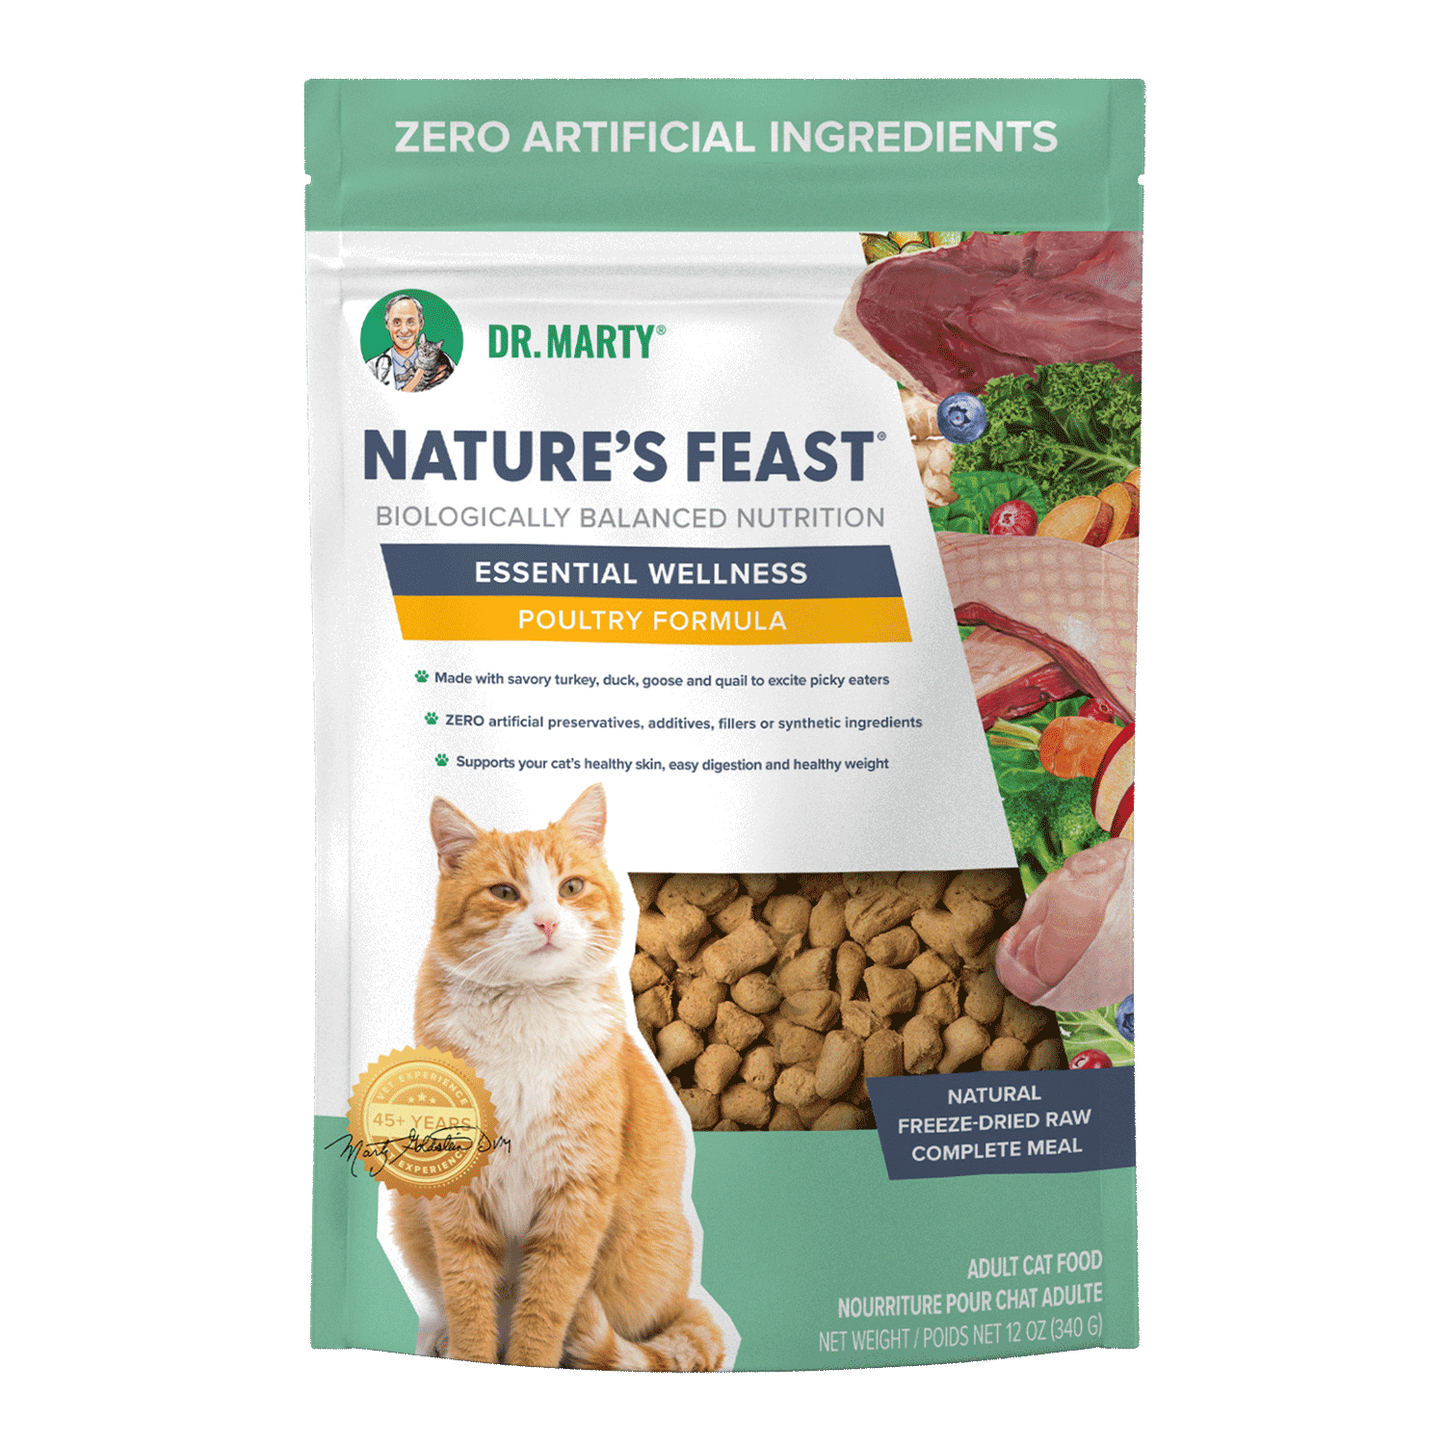 DR MARTY NATURE'S FEAST - POULTRY FORMULA FOR CATS